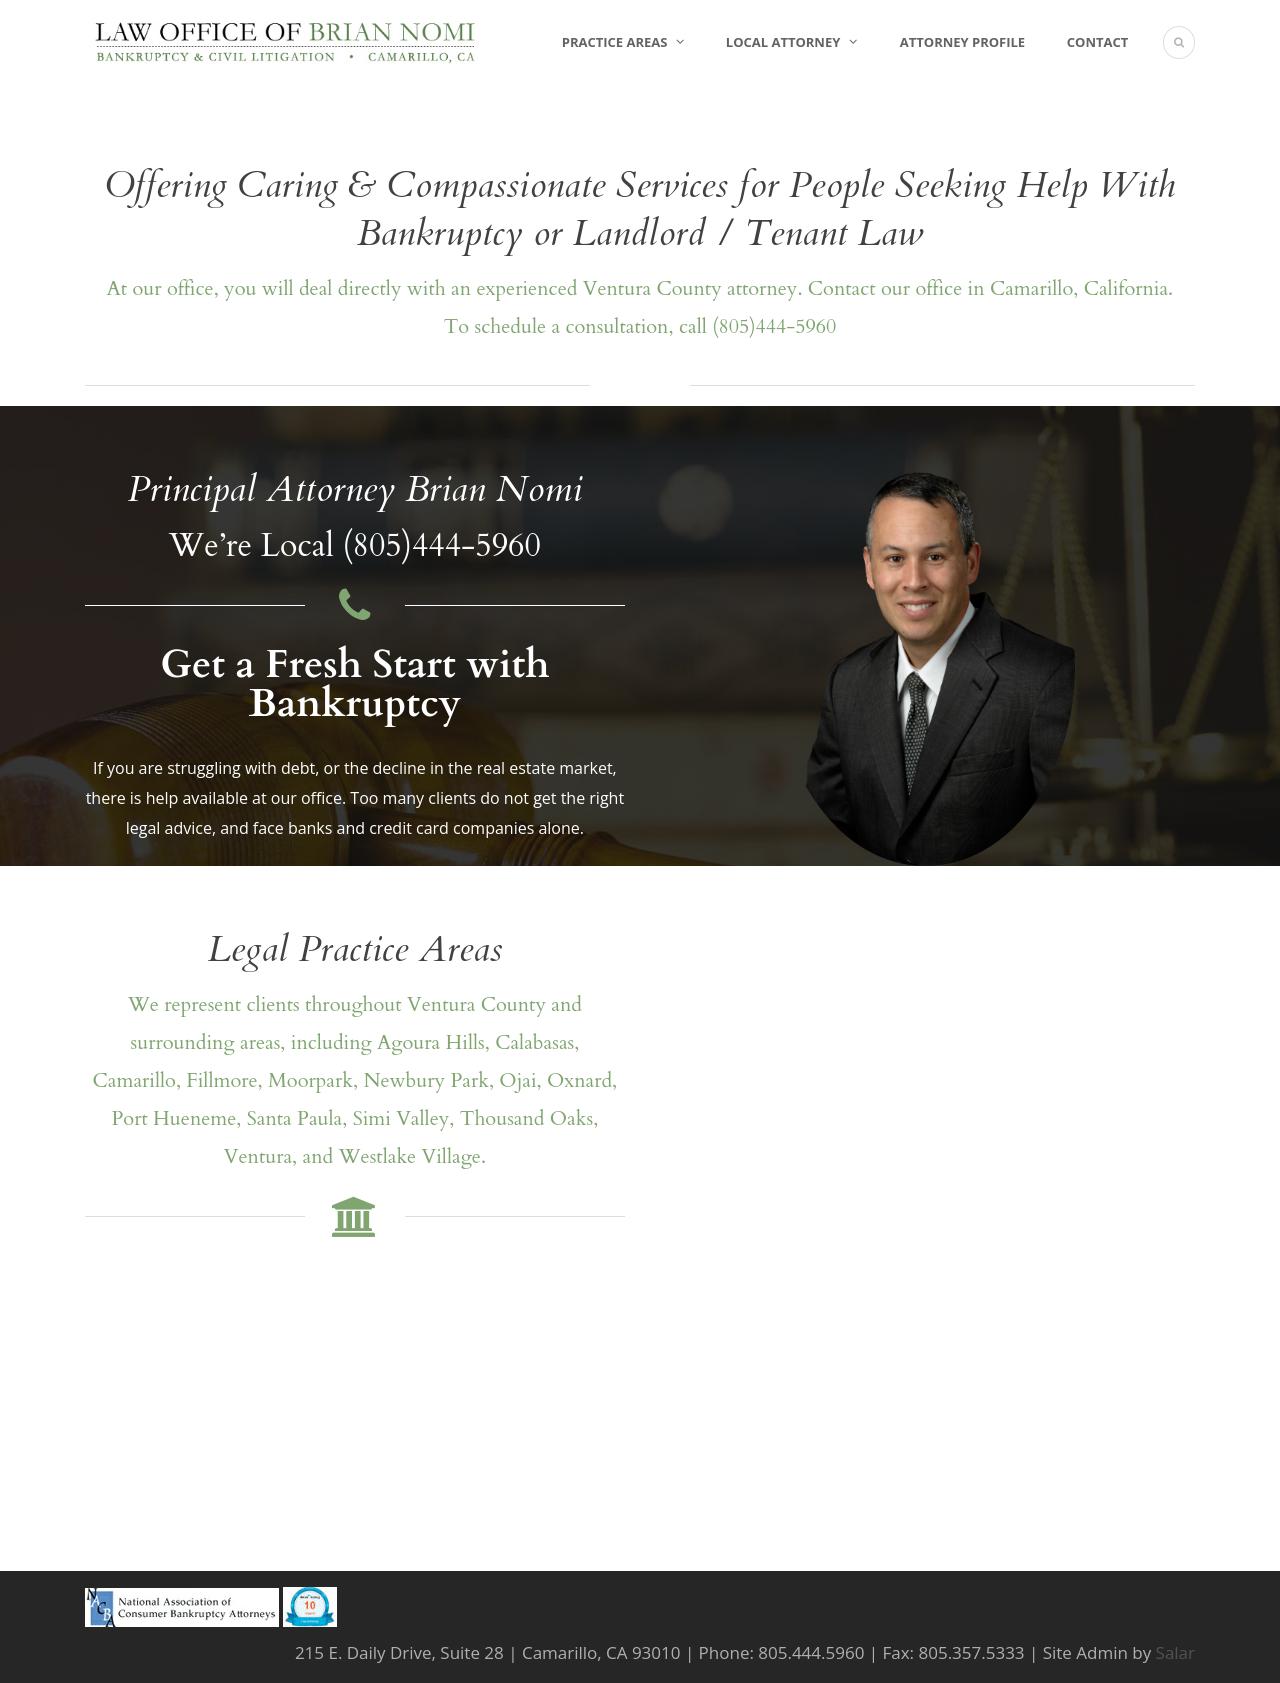 The Law Office of Brian Nomi - Camarillo CA Lawyers